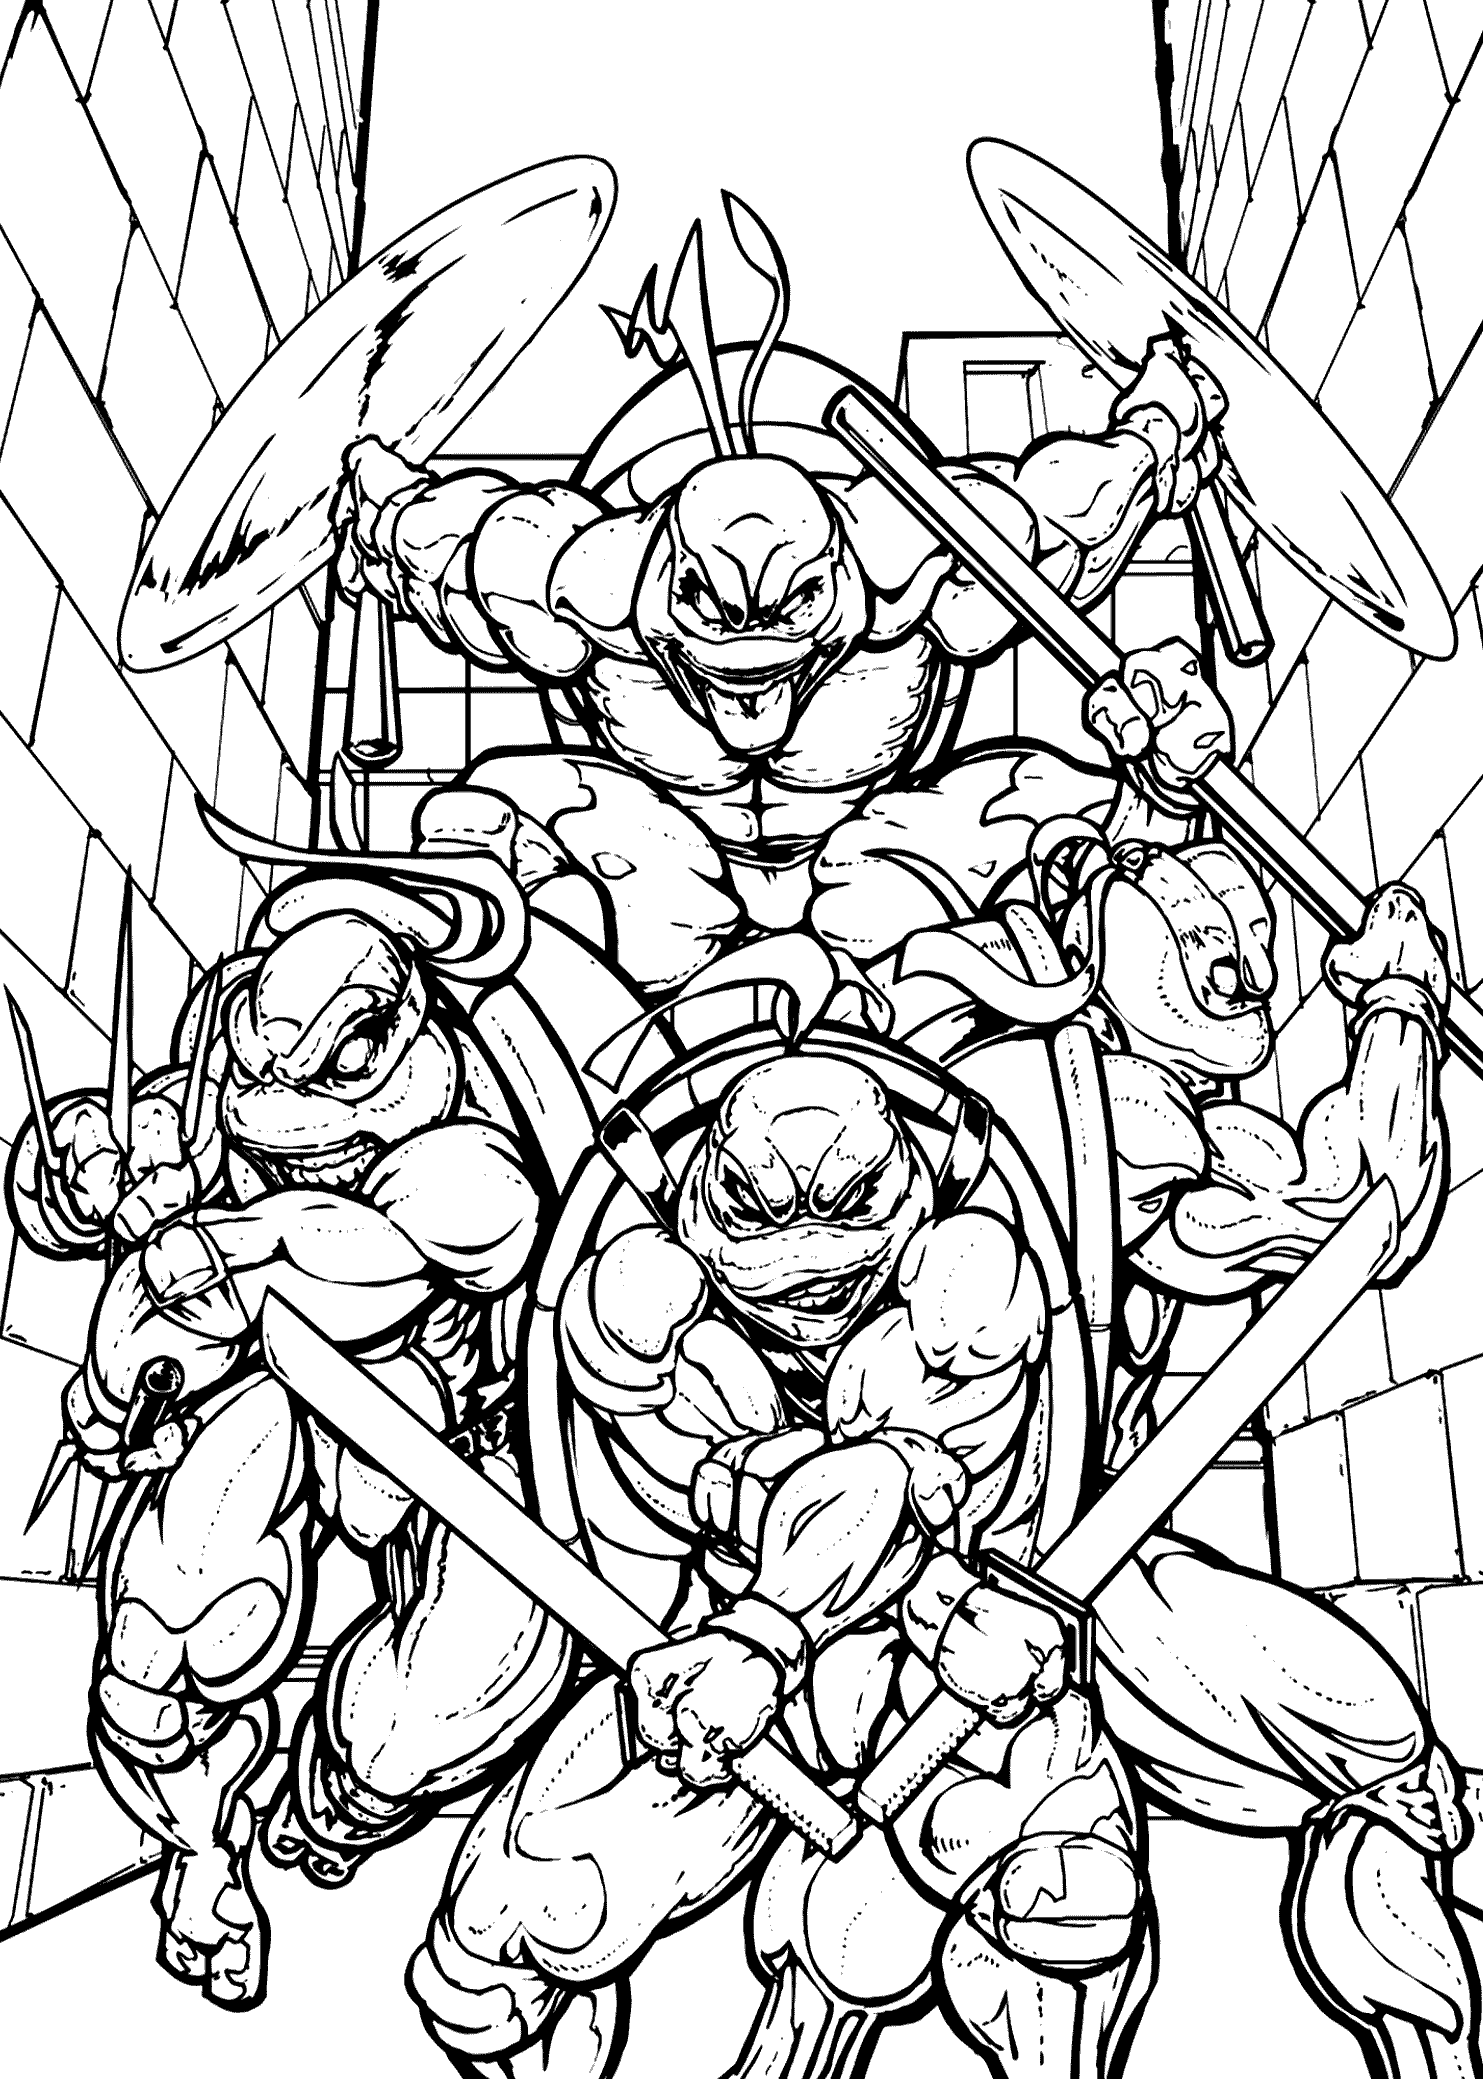 coloring book pages teenage mutant ninja turtles new tmnt coloring pages getcoloringpagescom ninja teenage pages mutant coloring turtles book 